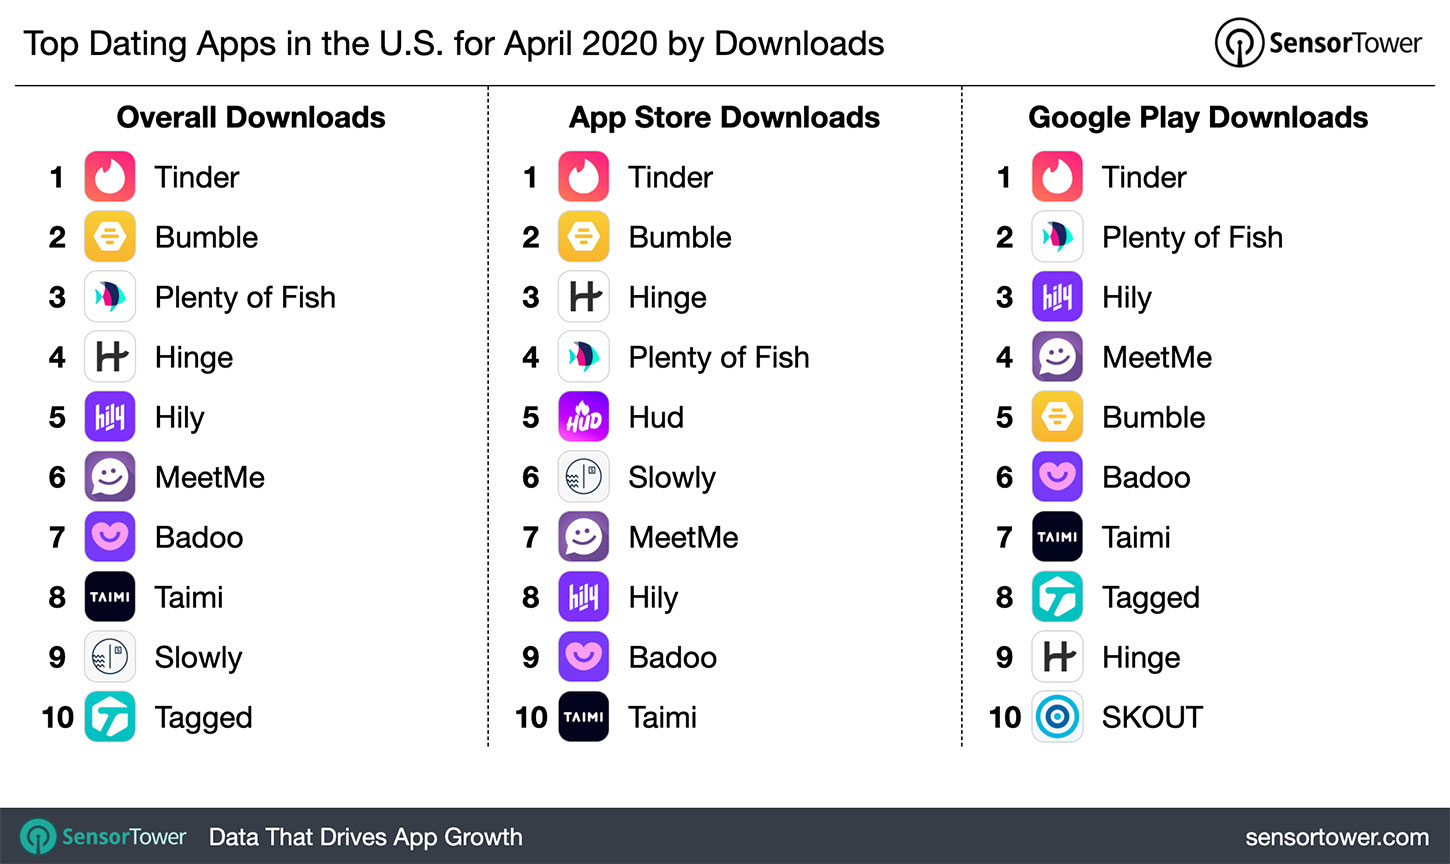 Top Dating Apps in U.S. 2020 by Downloads